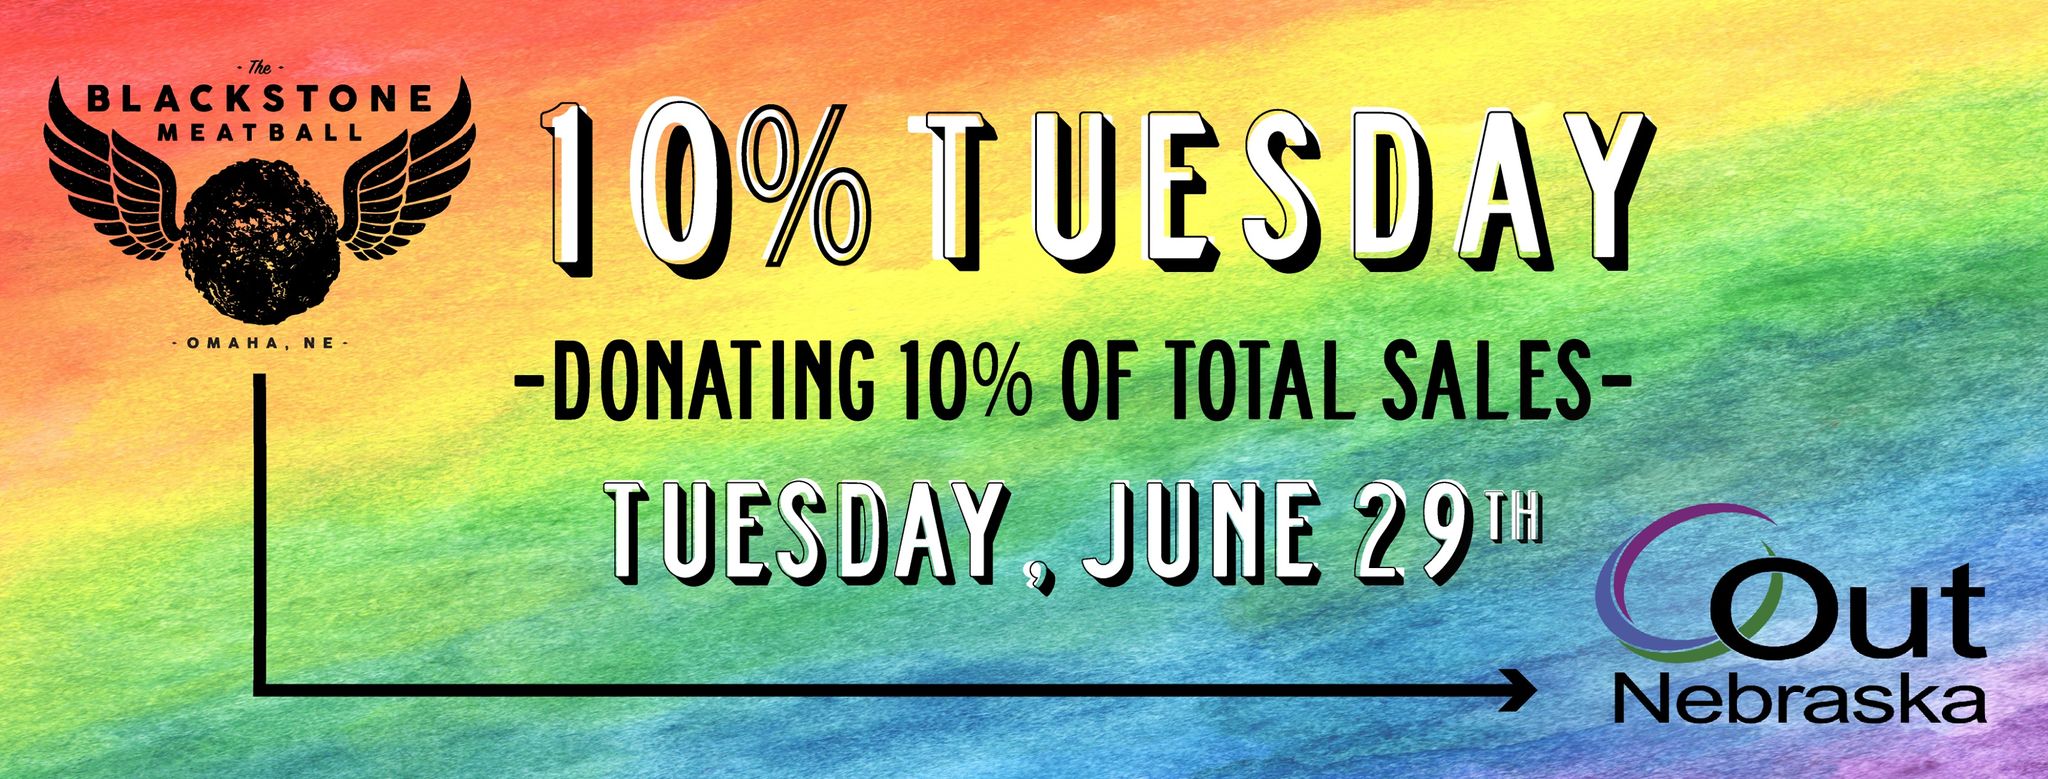 Rainbow background; middle of page has white lettering that says 10% Tuesday; next line is black lettering that says Donating 10% of Total Sales, next line is white lettering that reads Tuesday, June 29th. Top left corner is Blackstone Meatball logo, bottom right corner is OutNebraska logo